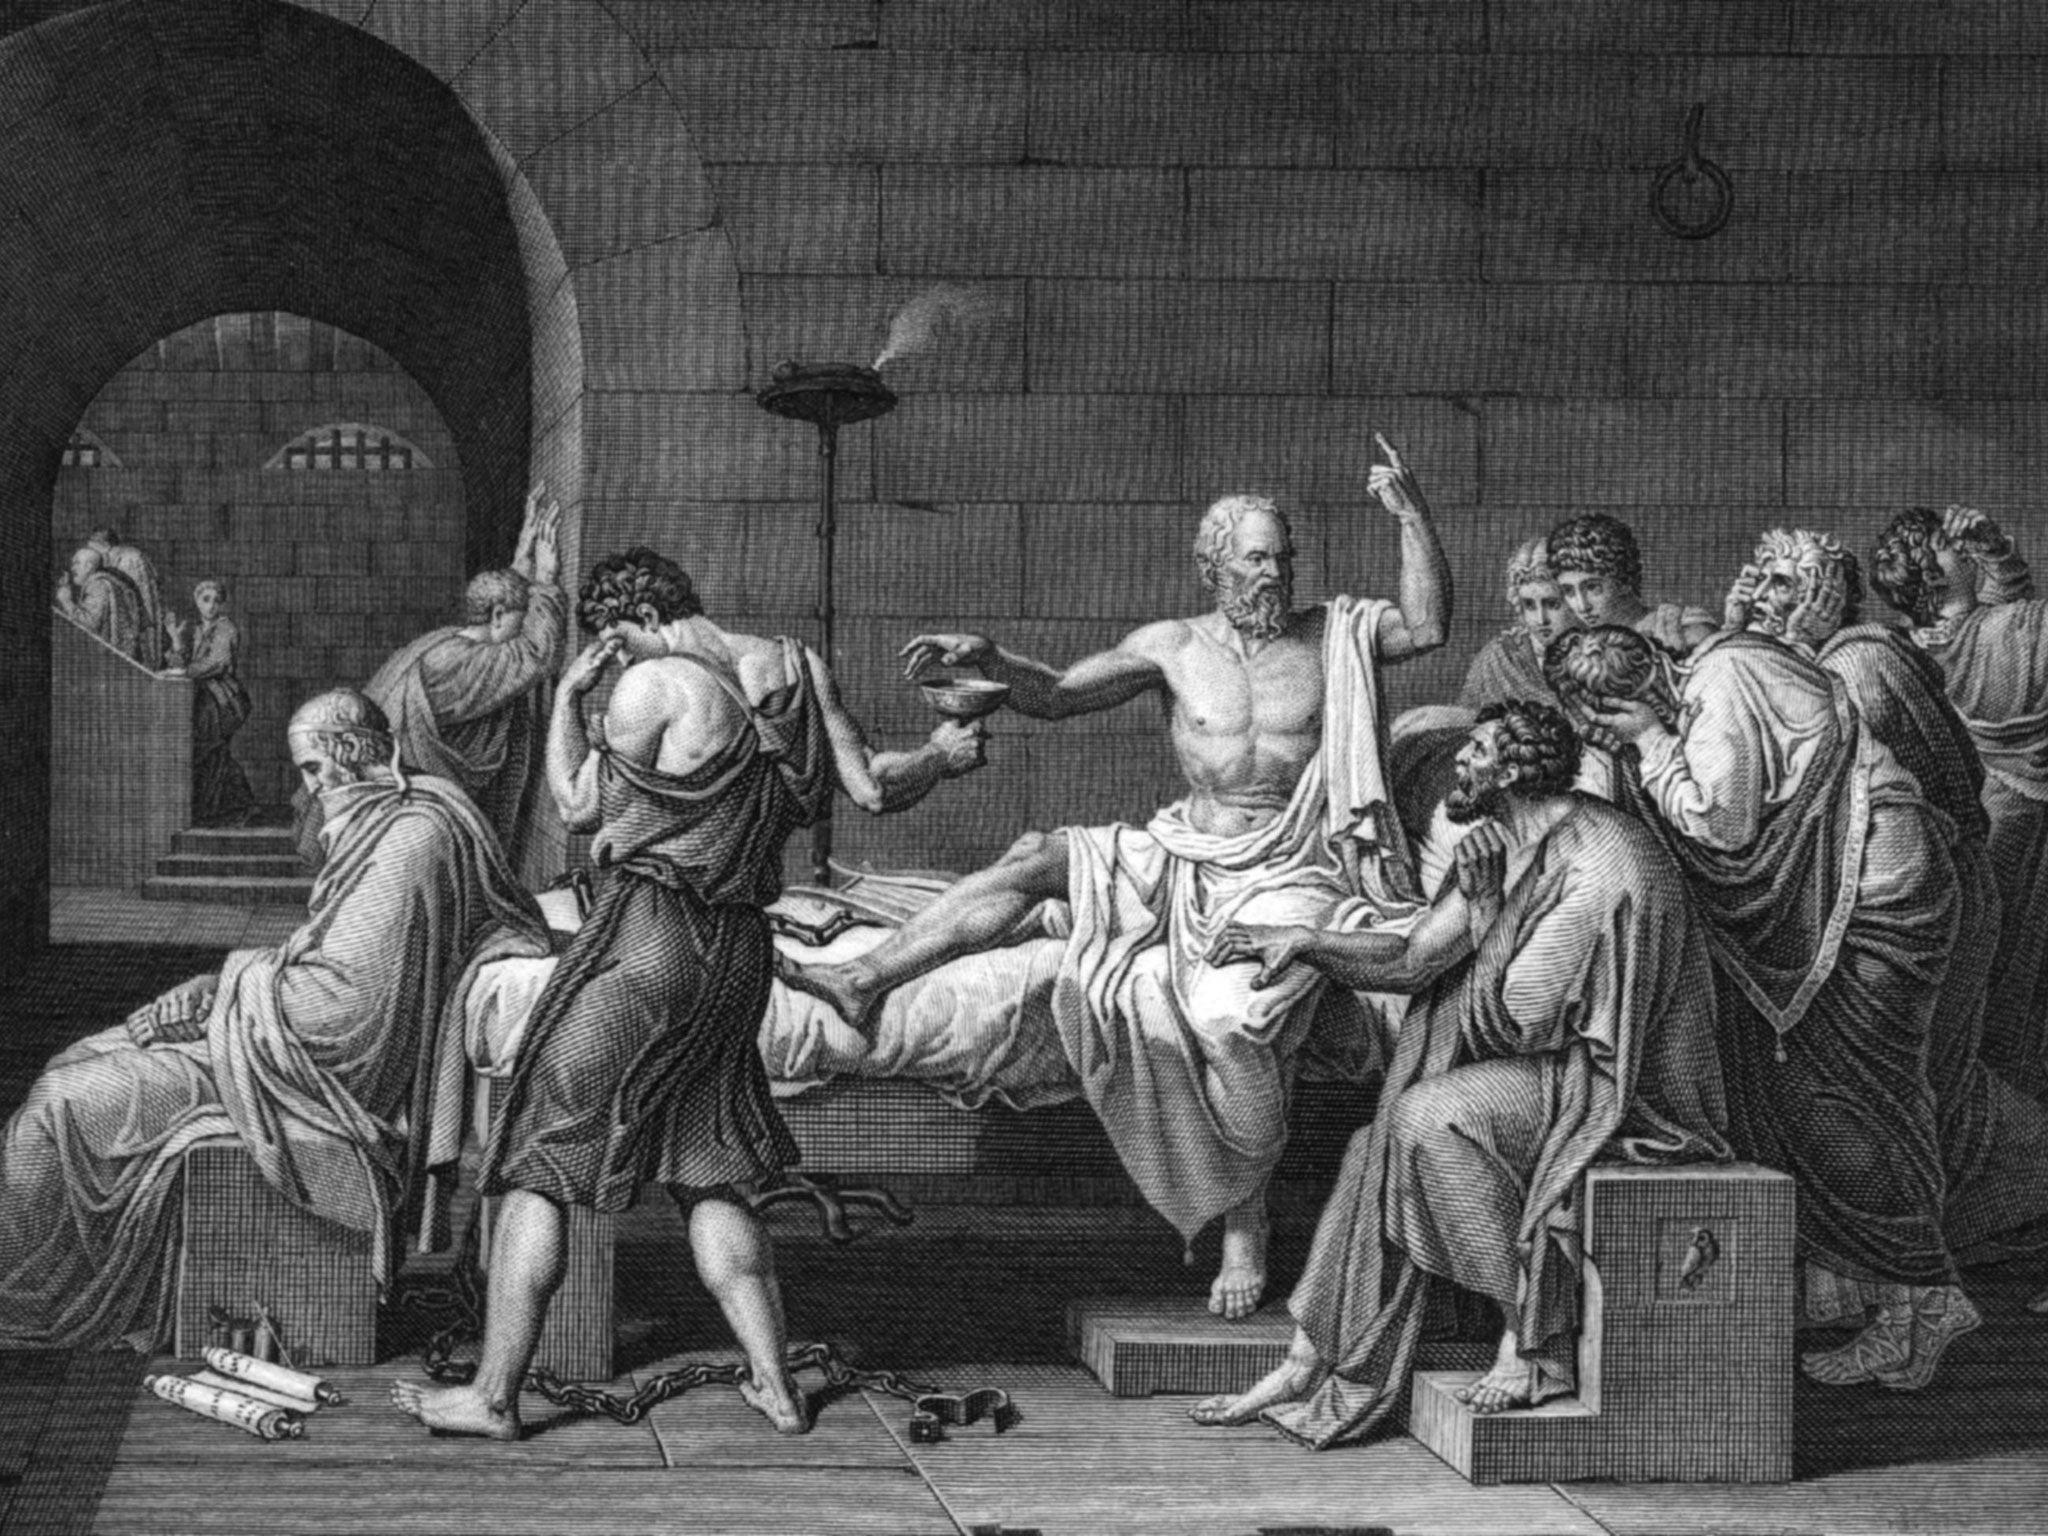 Subversive spirit: Socrates is forced to commit suicide by drinking hemlock